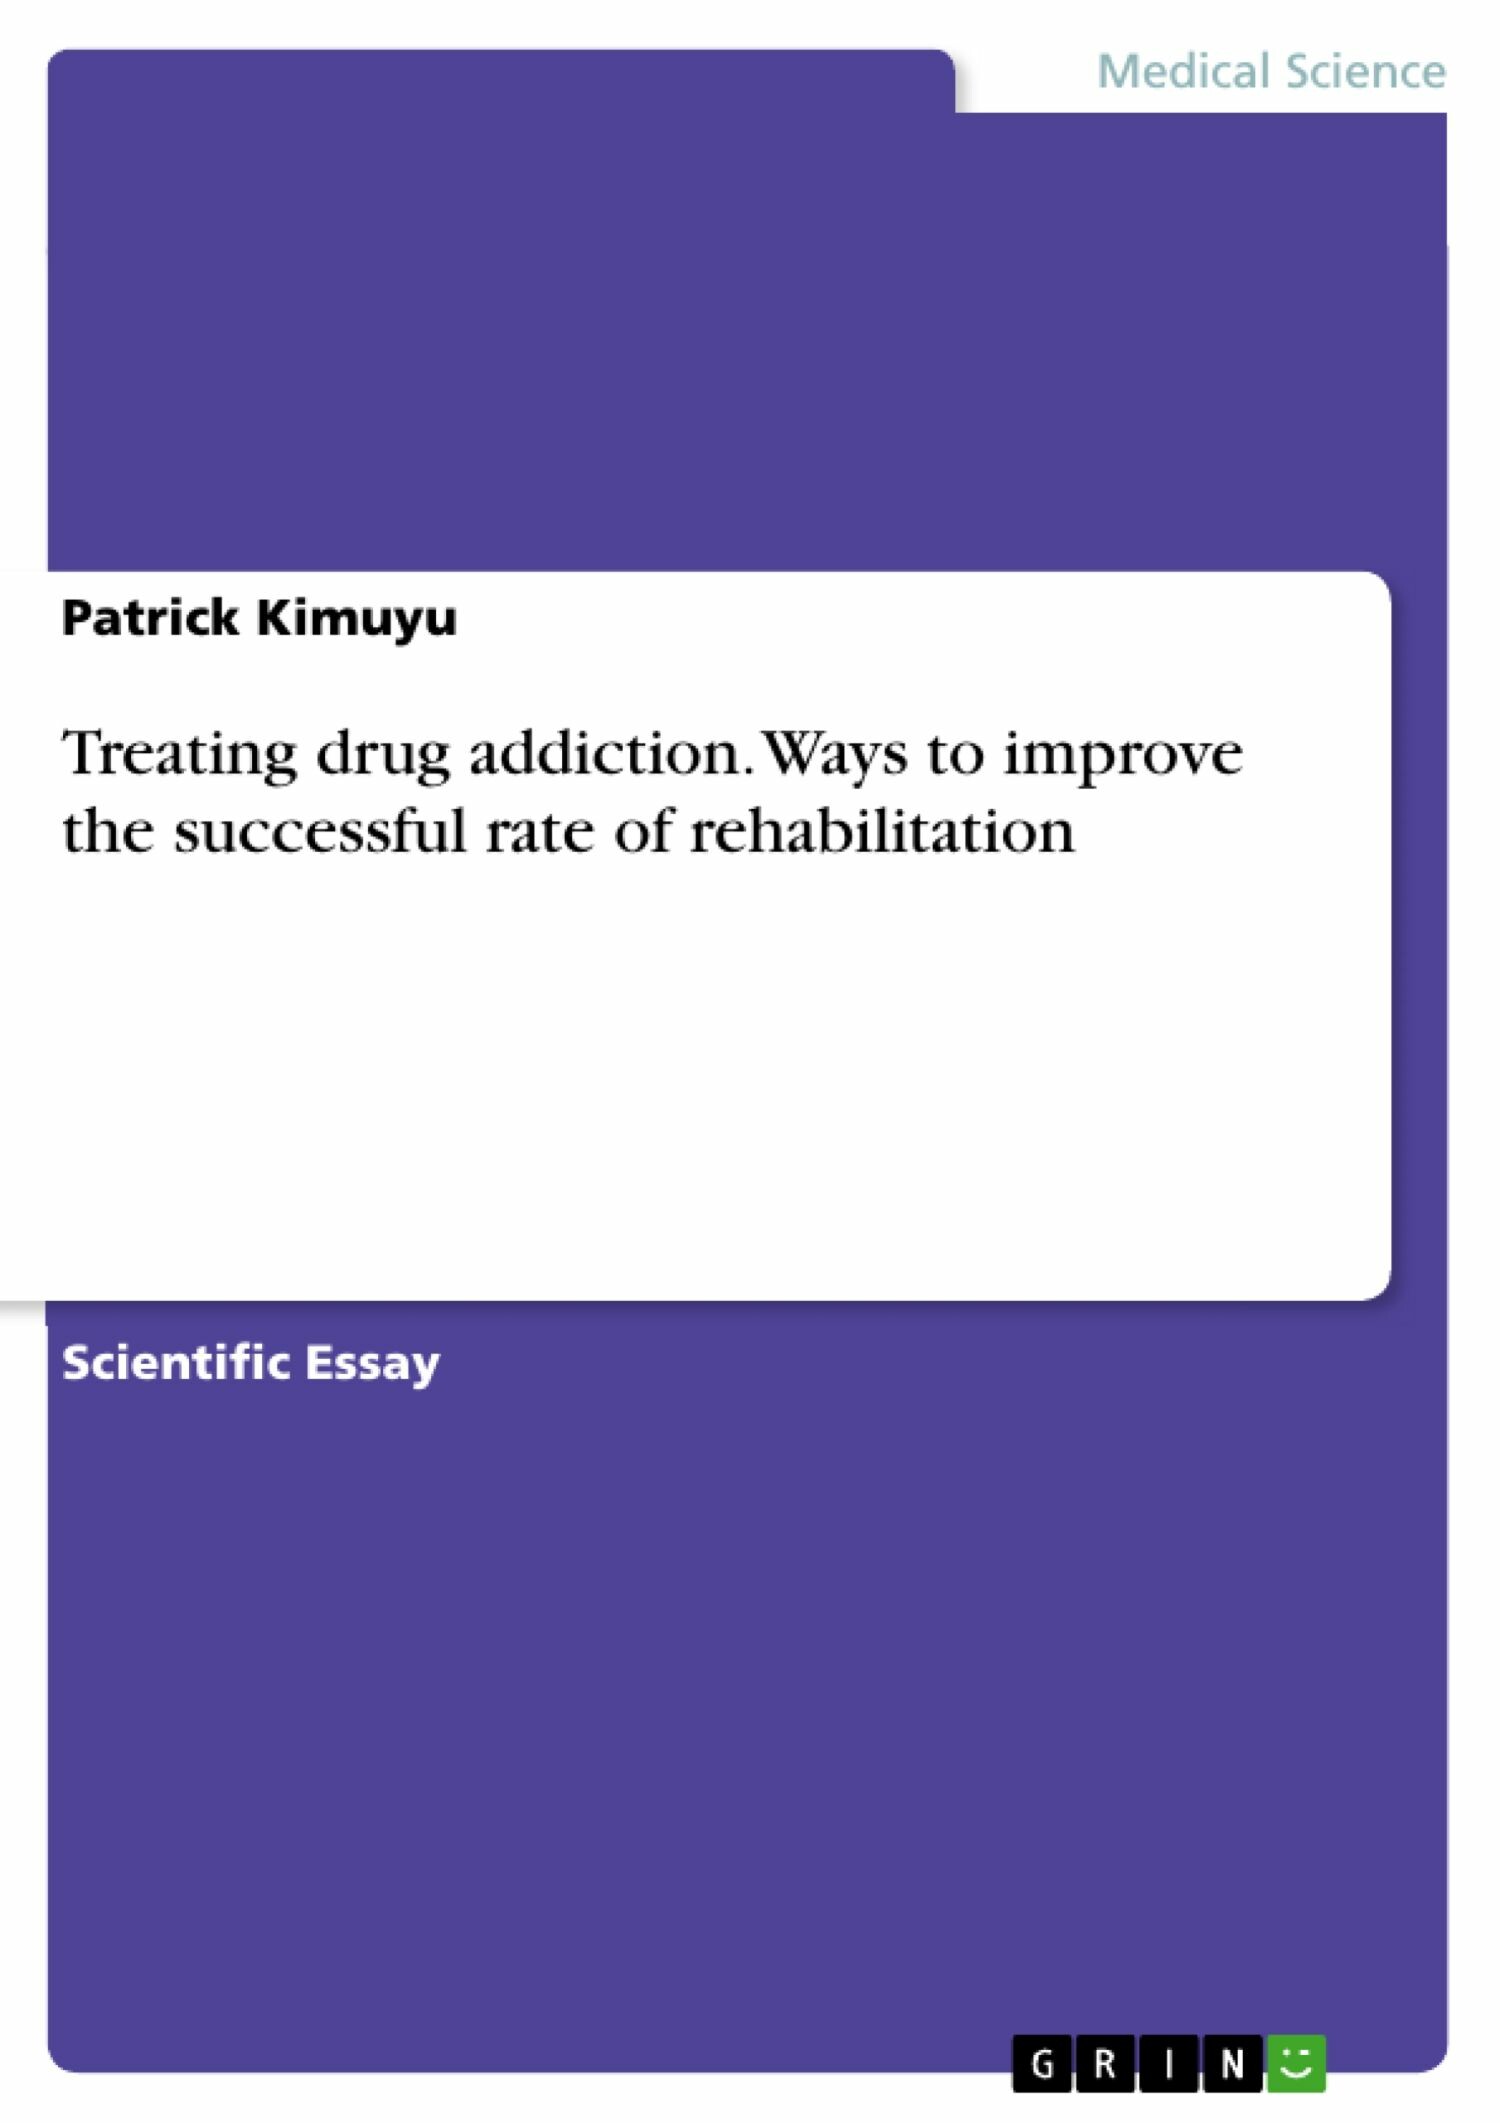 Treating drug addiction. Ways to improve the successful rate of rehabilitation